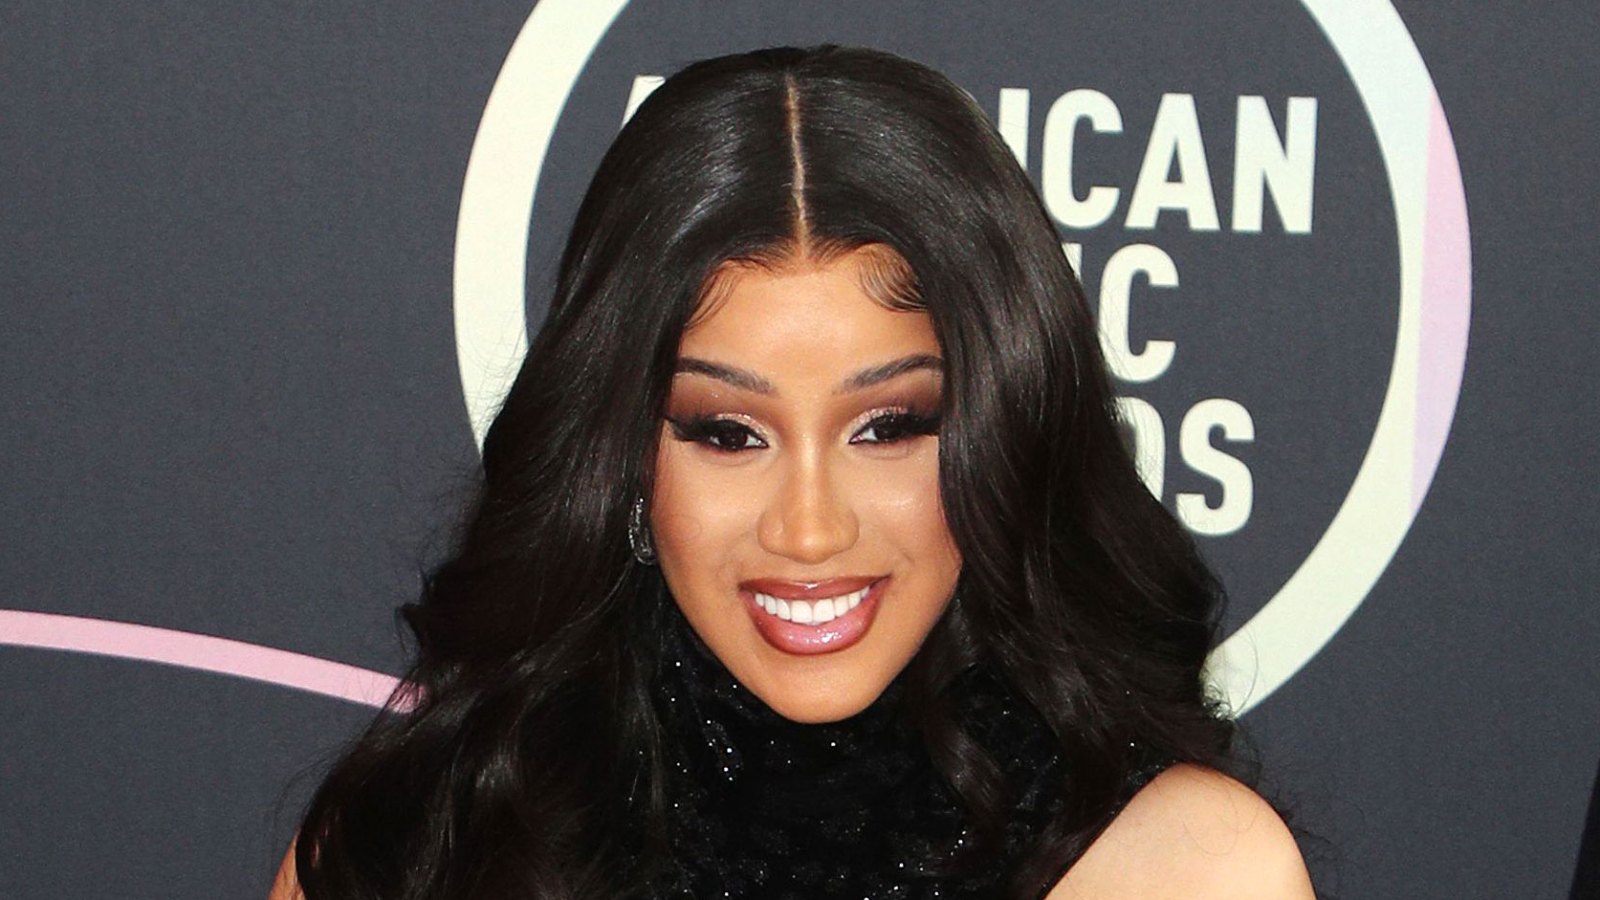 Cardi B Is 1 Percent Close to Getting Her Son’s Name Tattooed on Her Face